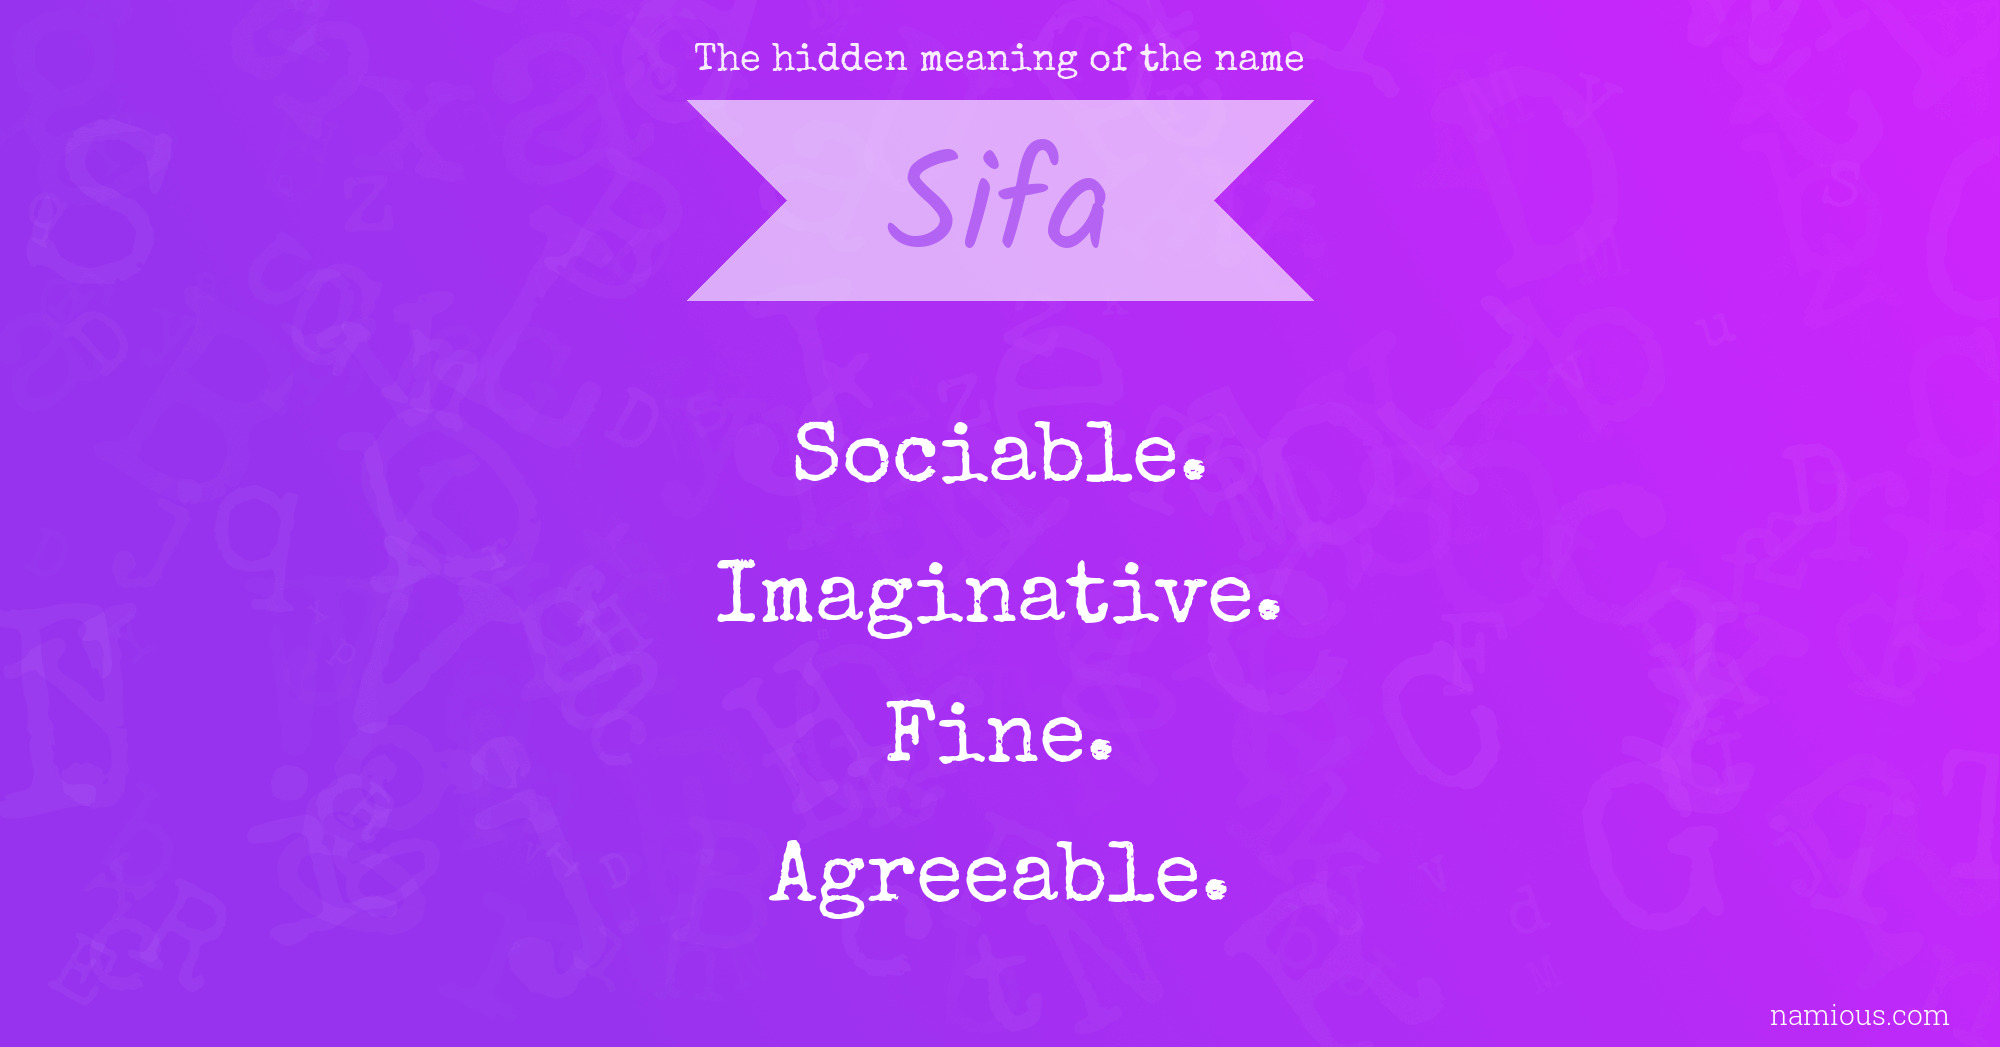 The hidden meaning of the name Sifa